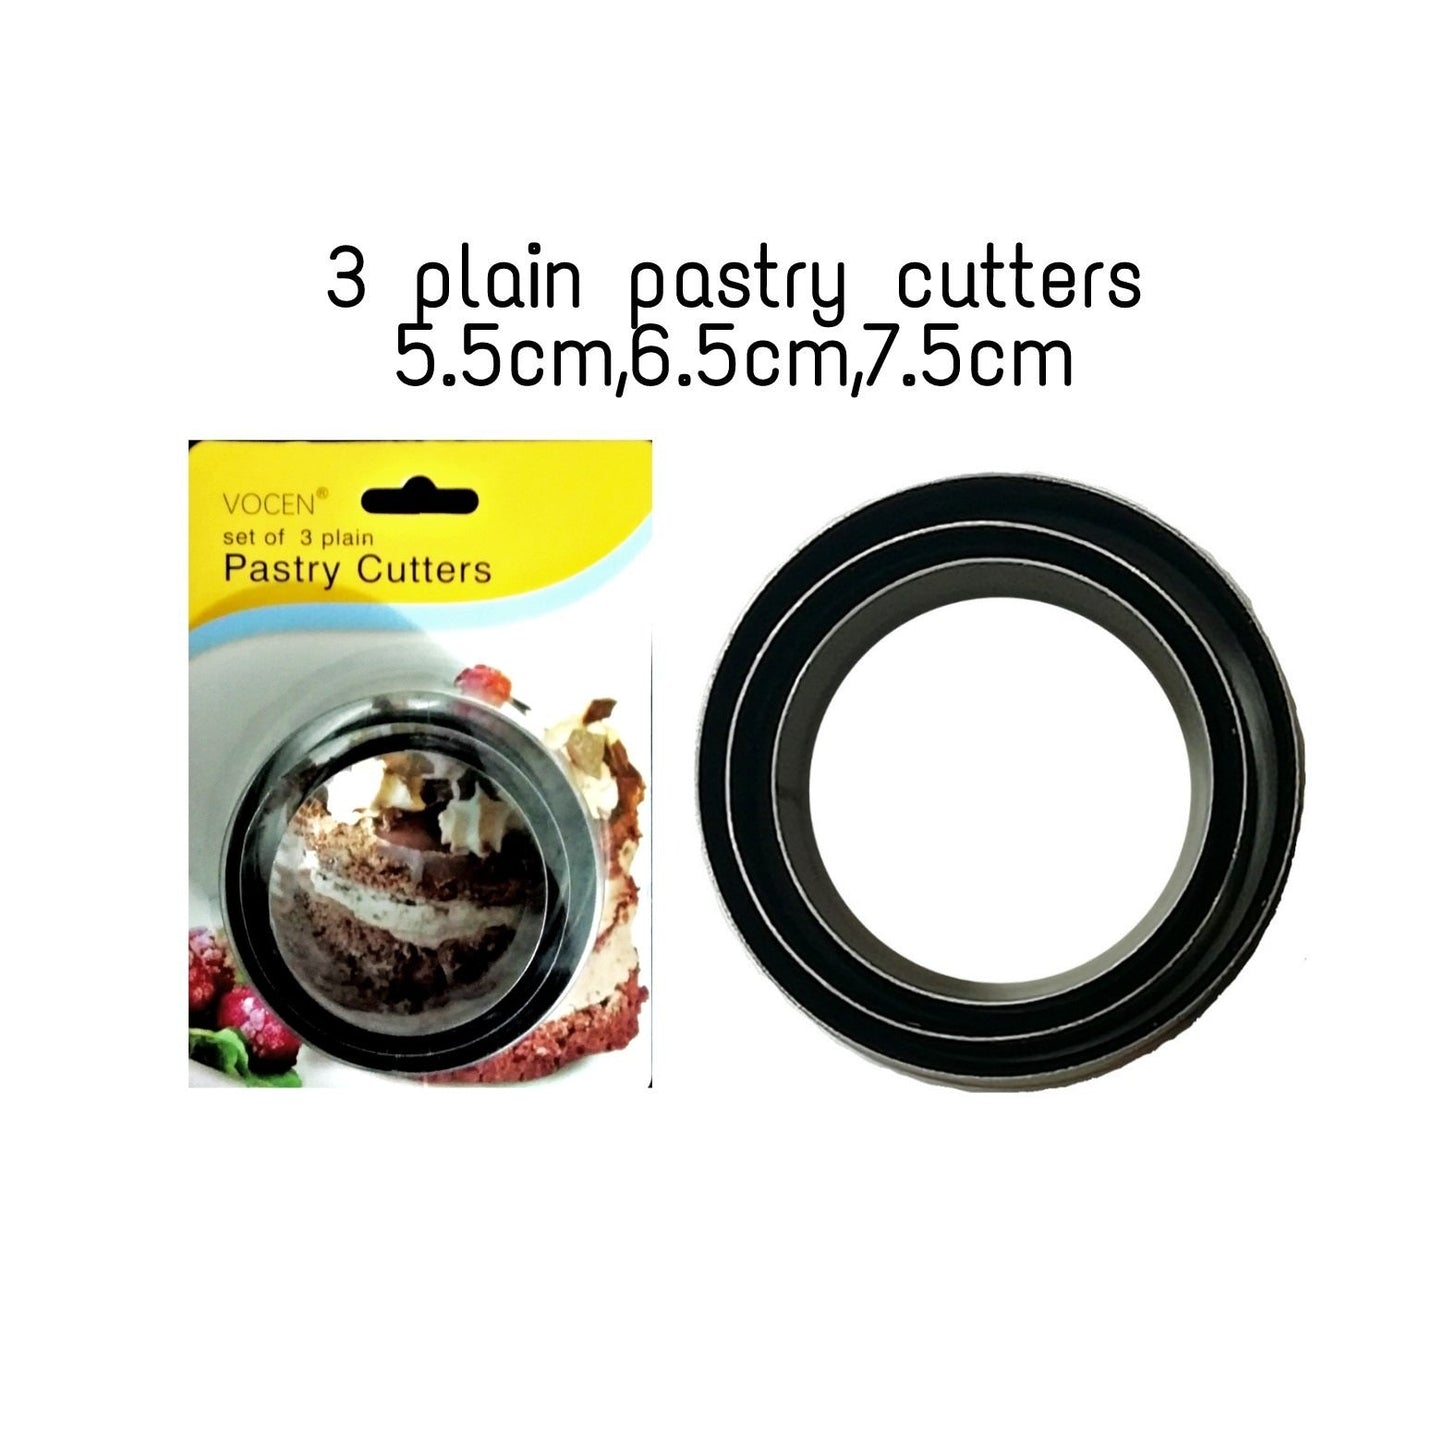 Vocen Set Of 3 Plain Pastry Cutters Stainless Steel